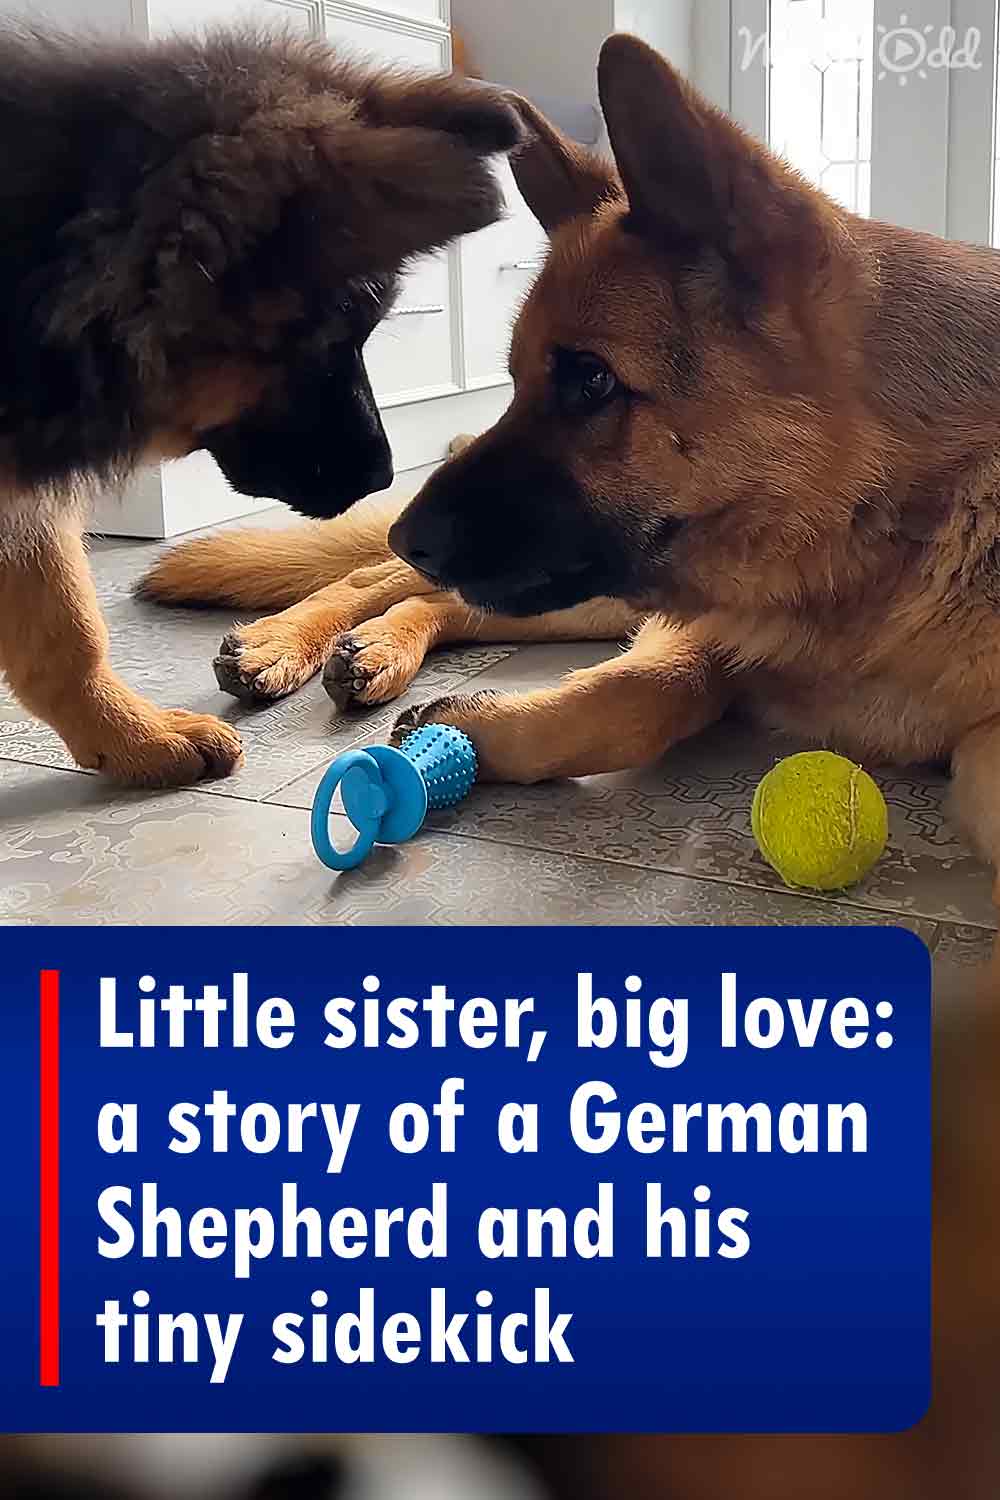 Little sister, big love: a story of a German Shepherd and his tiny sidekick